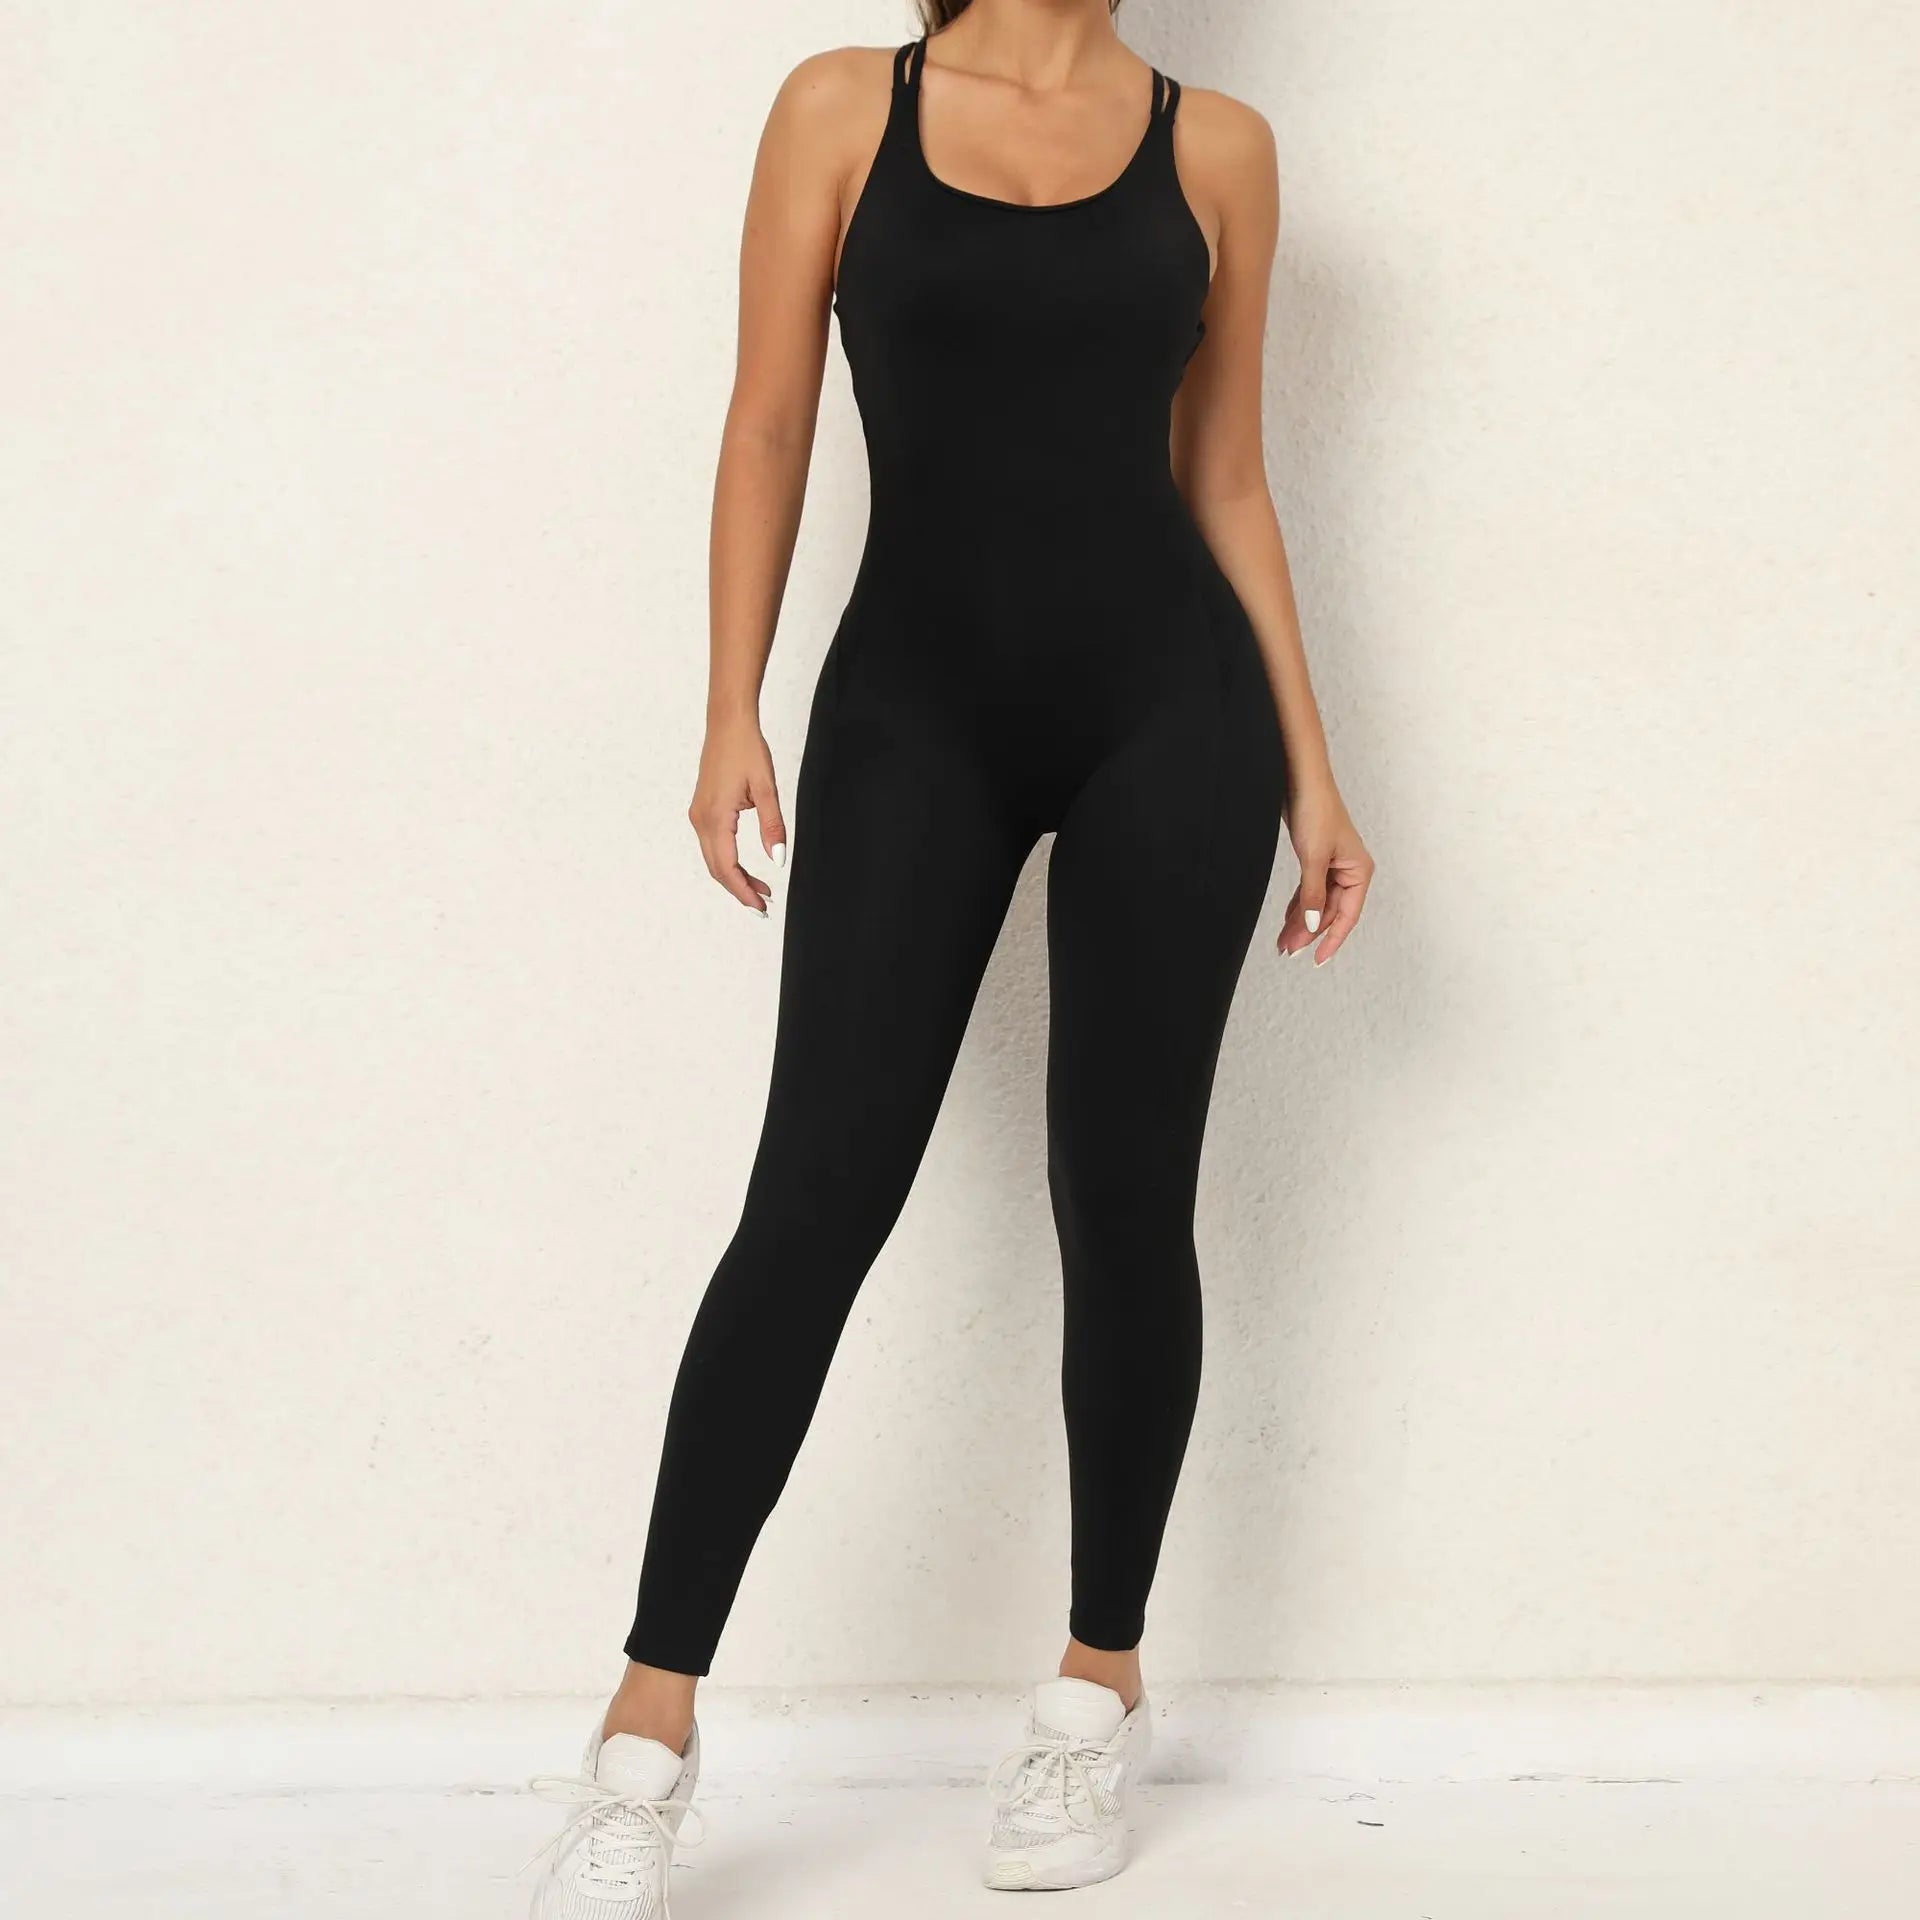 Yoga Gym Jumpsuit Women Sports Overalls Lycra Active Wear Fitness Clothing Women Workout Clothes for Women Sport Outfit Red - Sellinashop